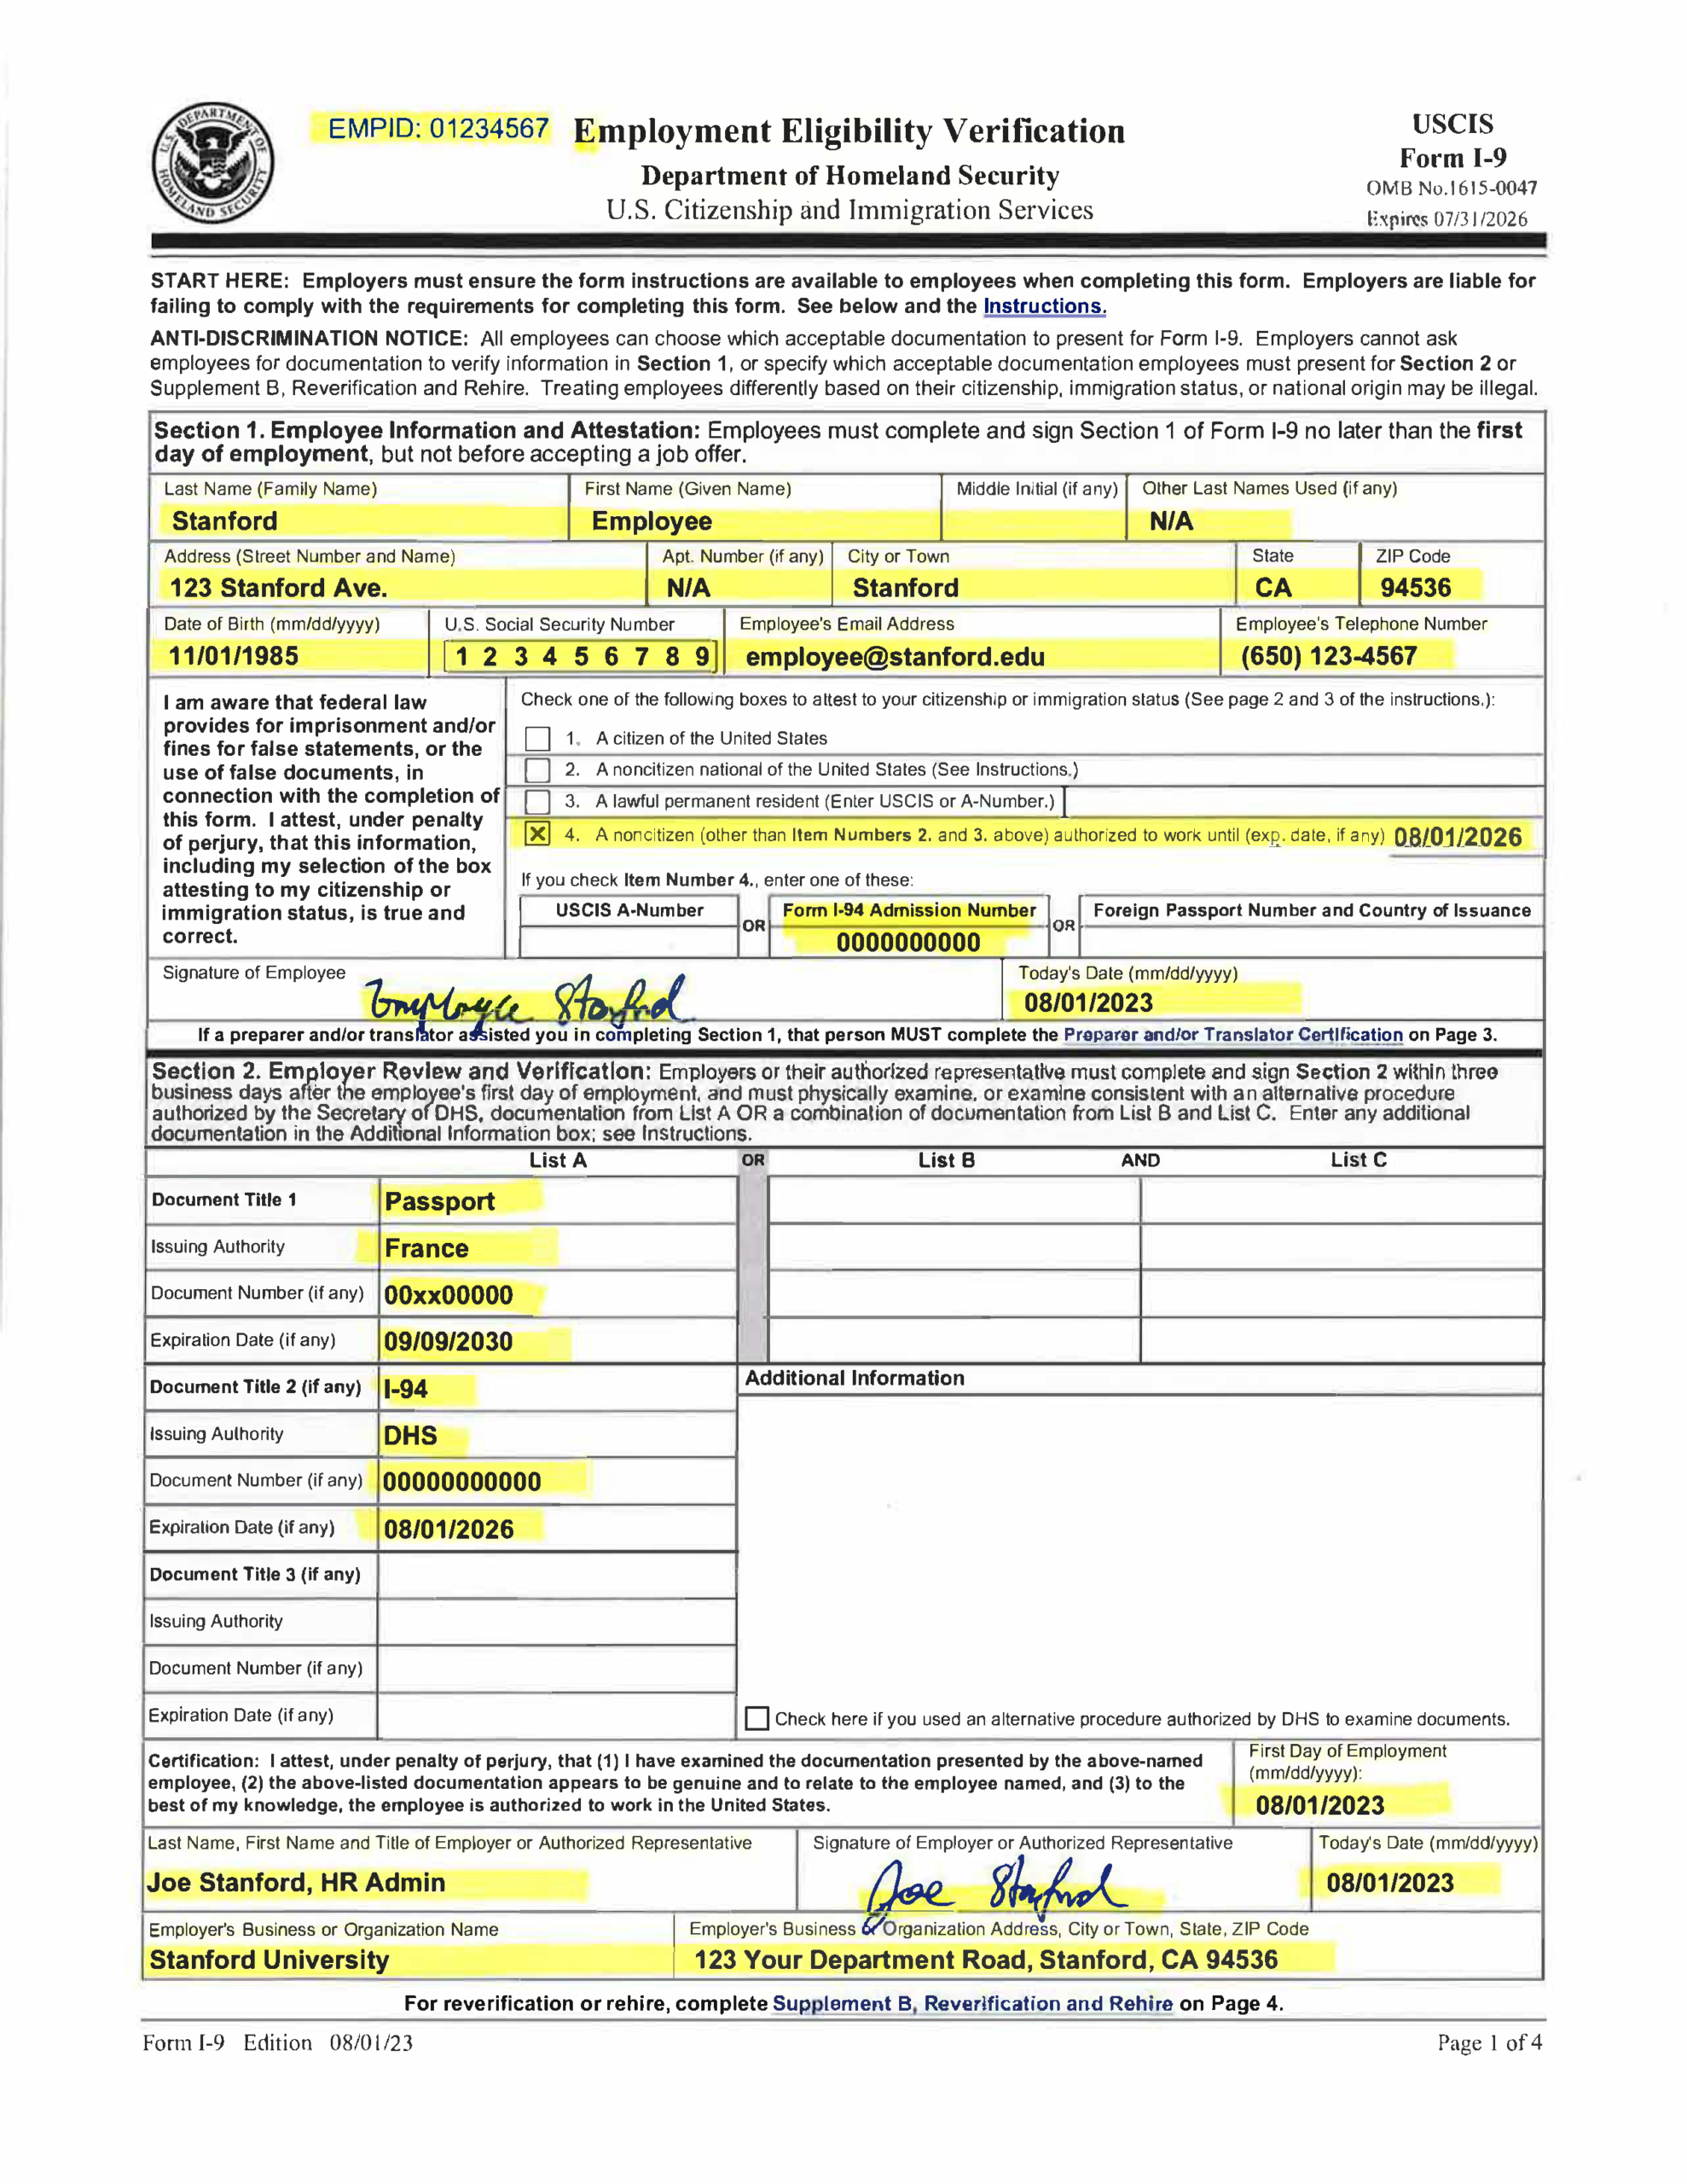 Examples Of Completed Form I-9 For Stanford within What Is An Uscis I-9 Form?